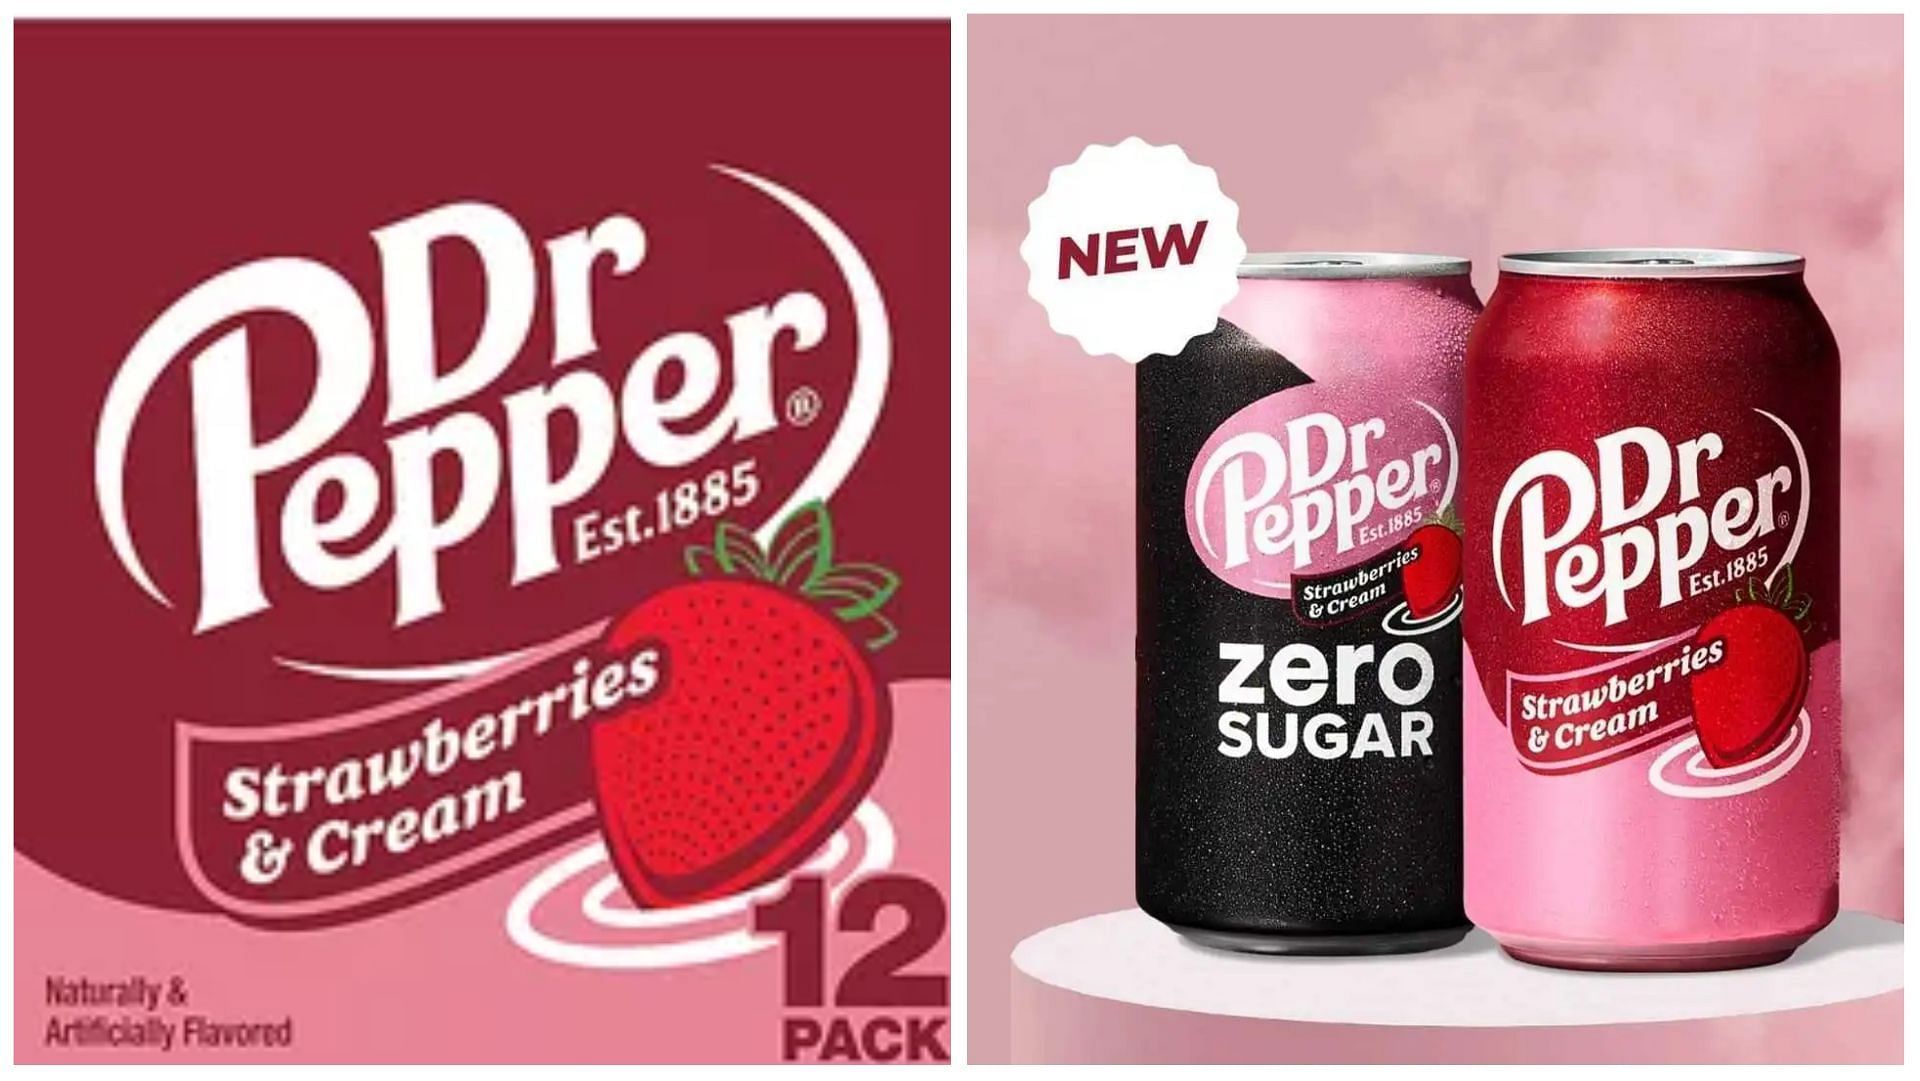 All new Dr Pepper